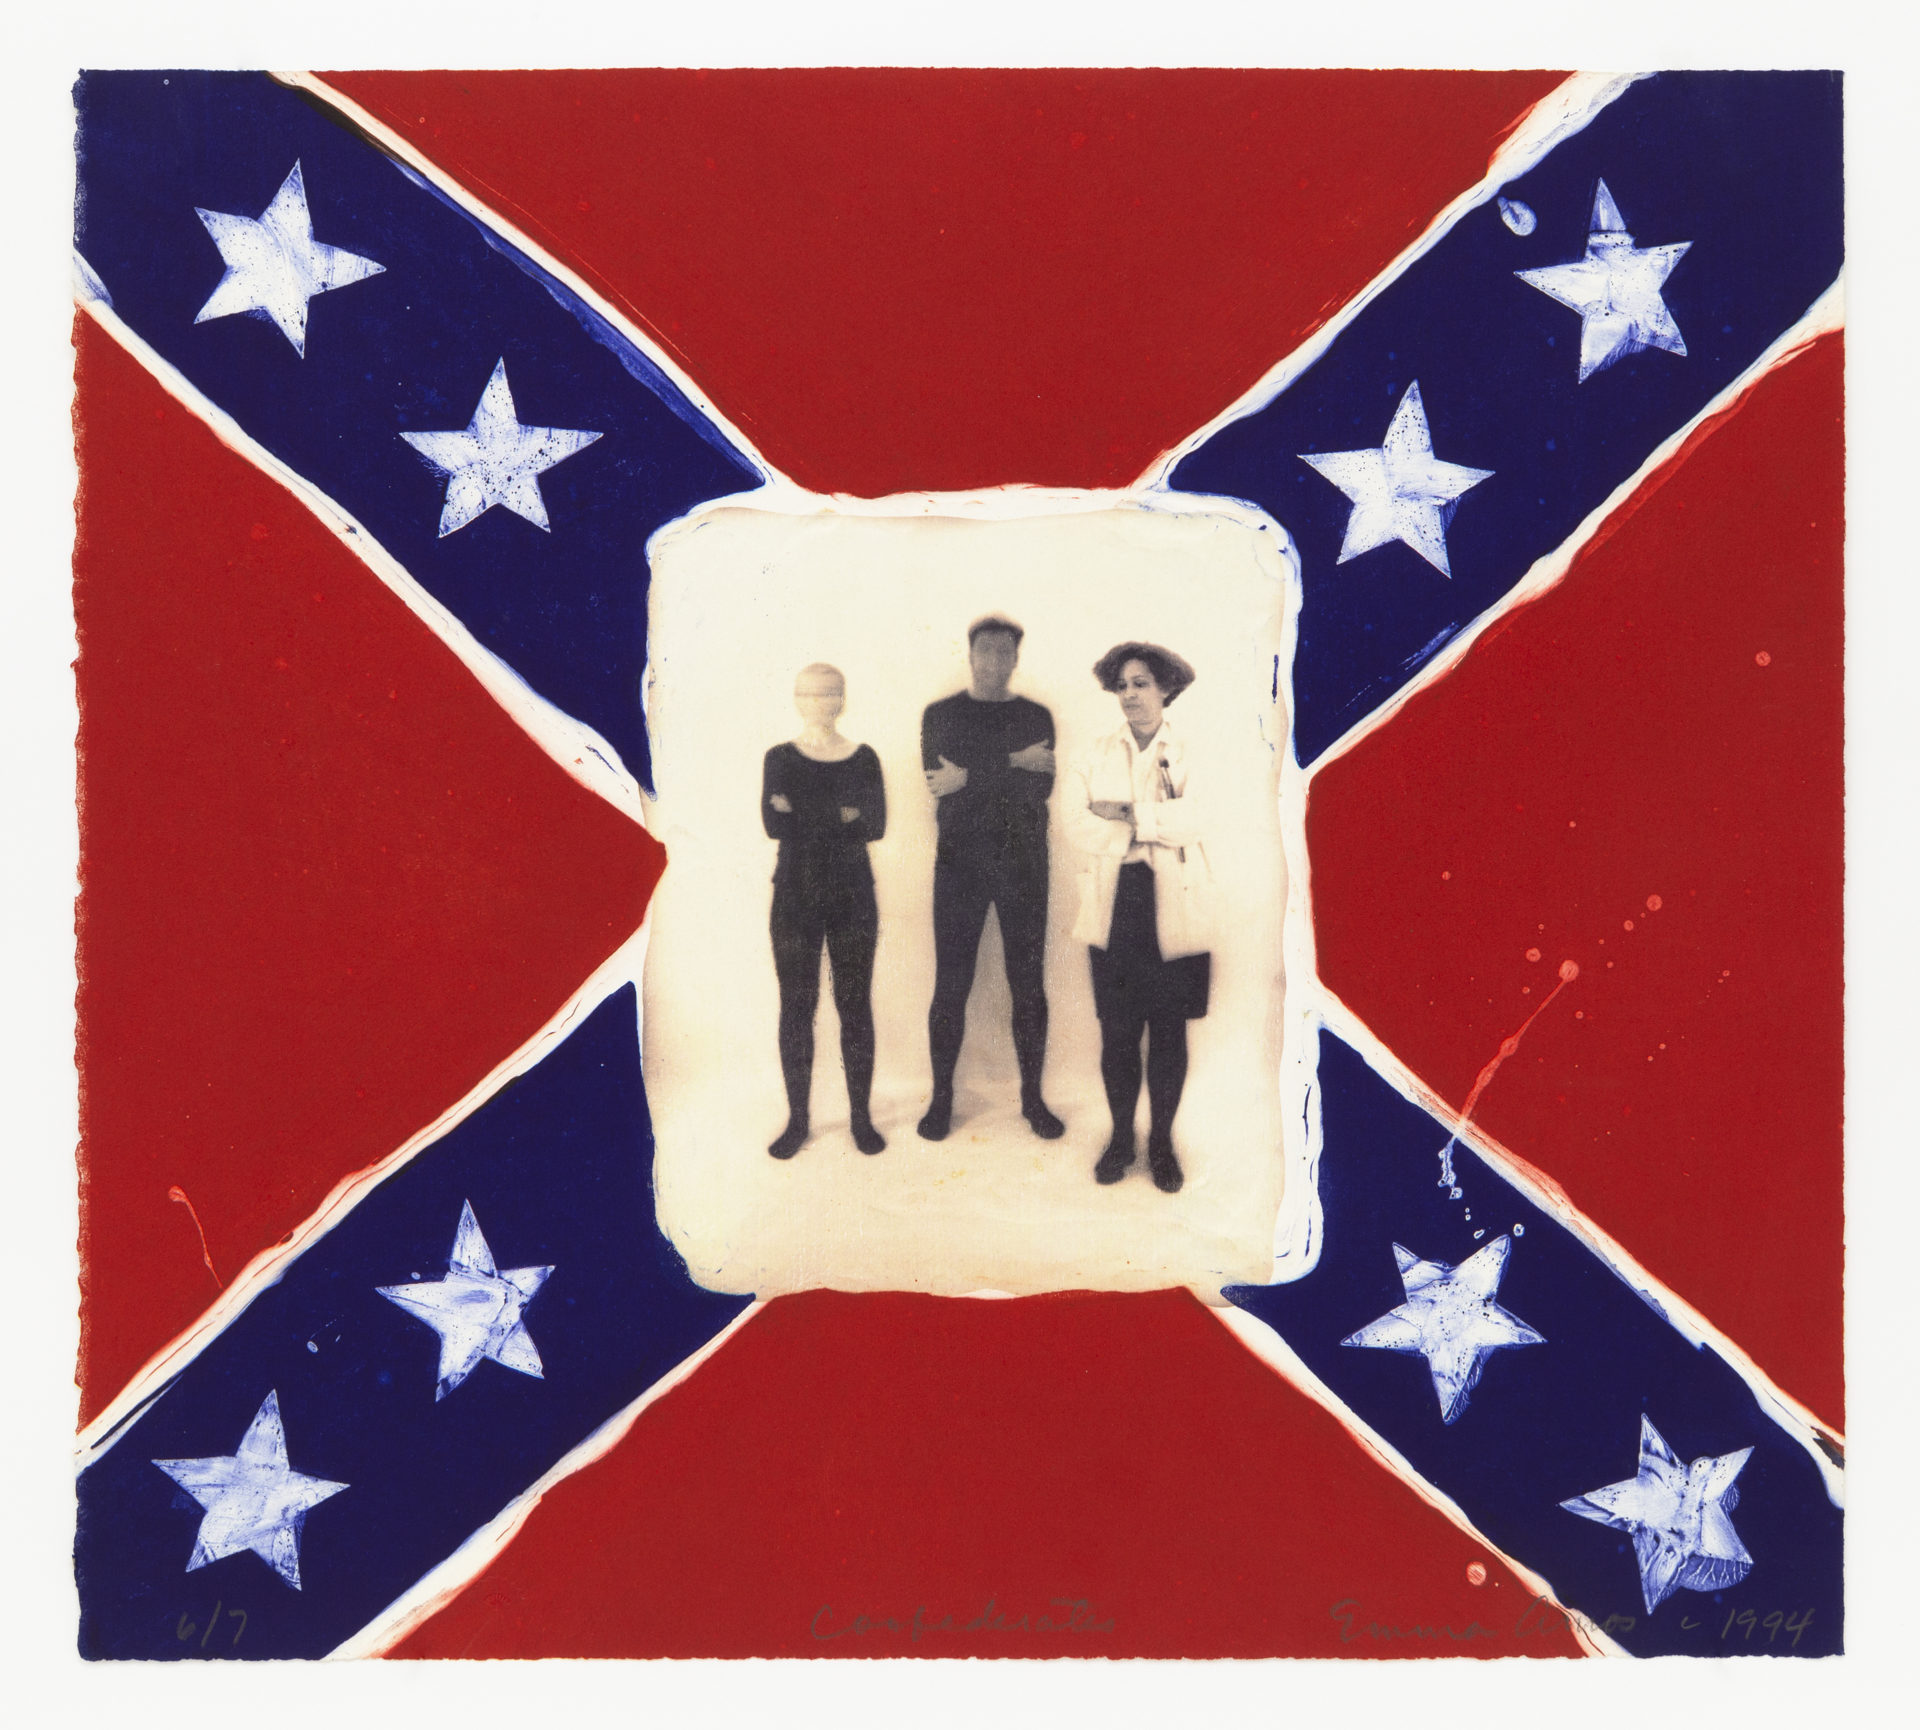 Confederates, 1994 Collagraph and photo transfer 18 x 20 inches (45.7 x 50.8 cm) Edition of 7